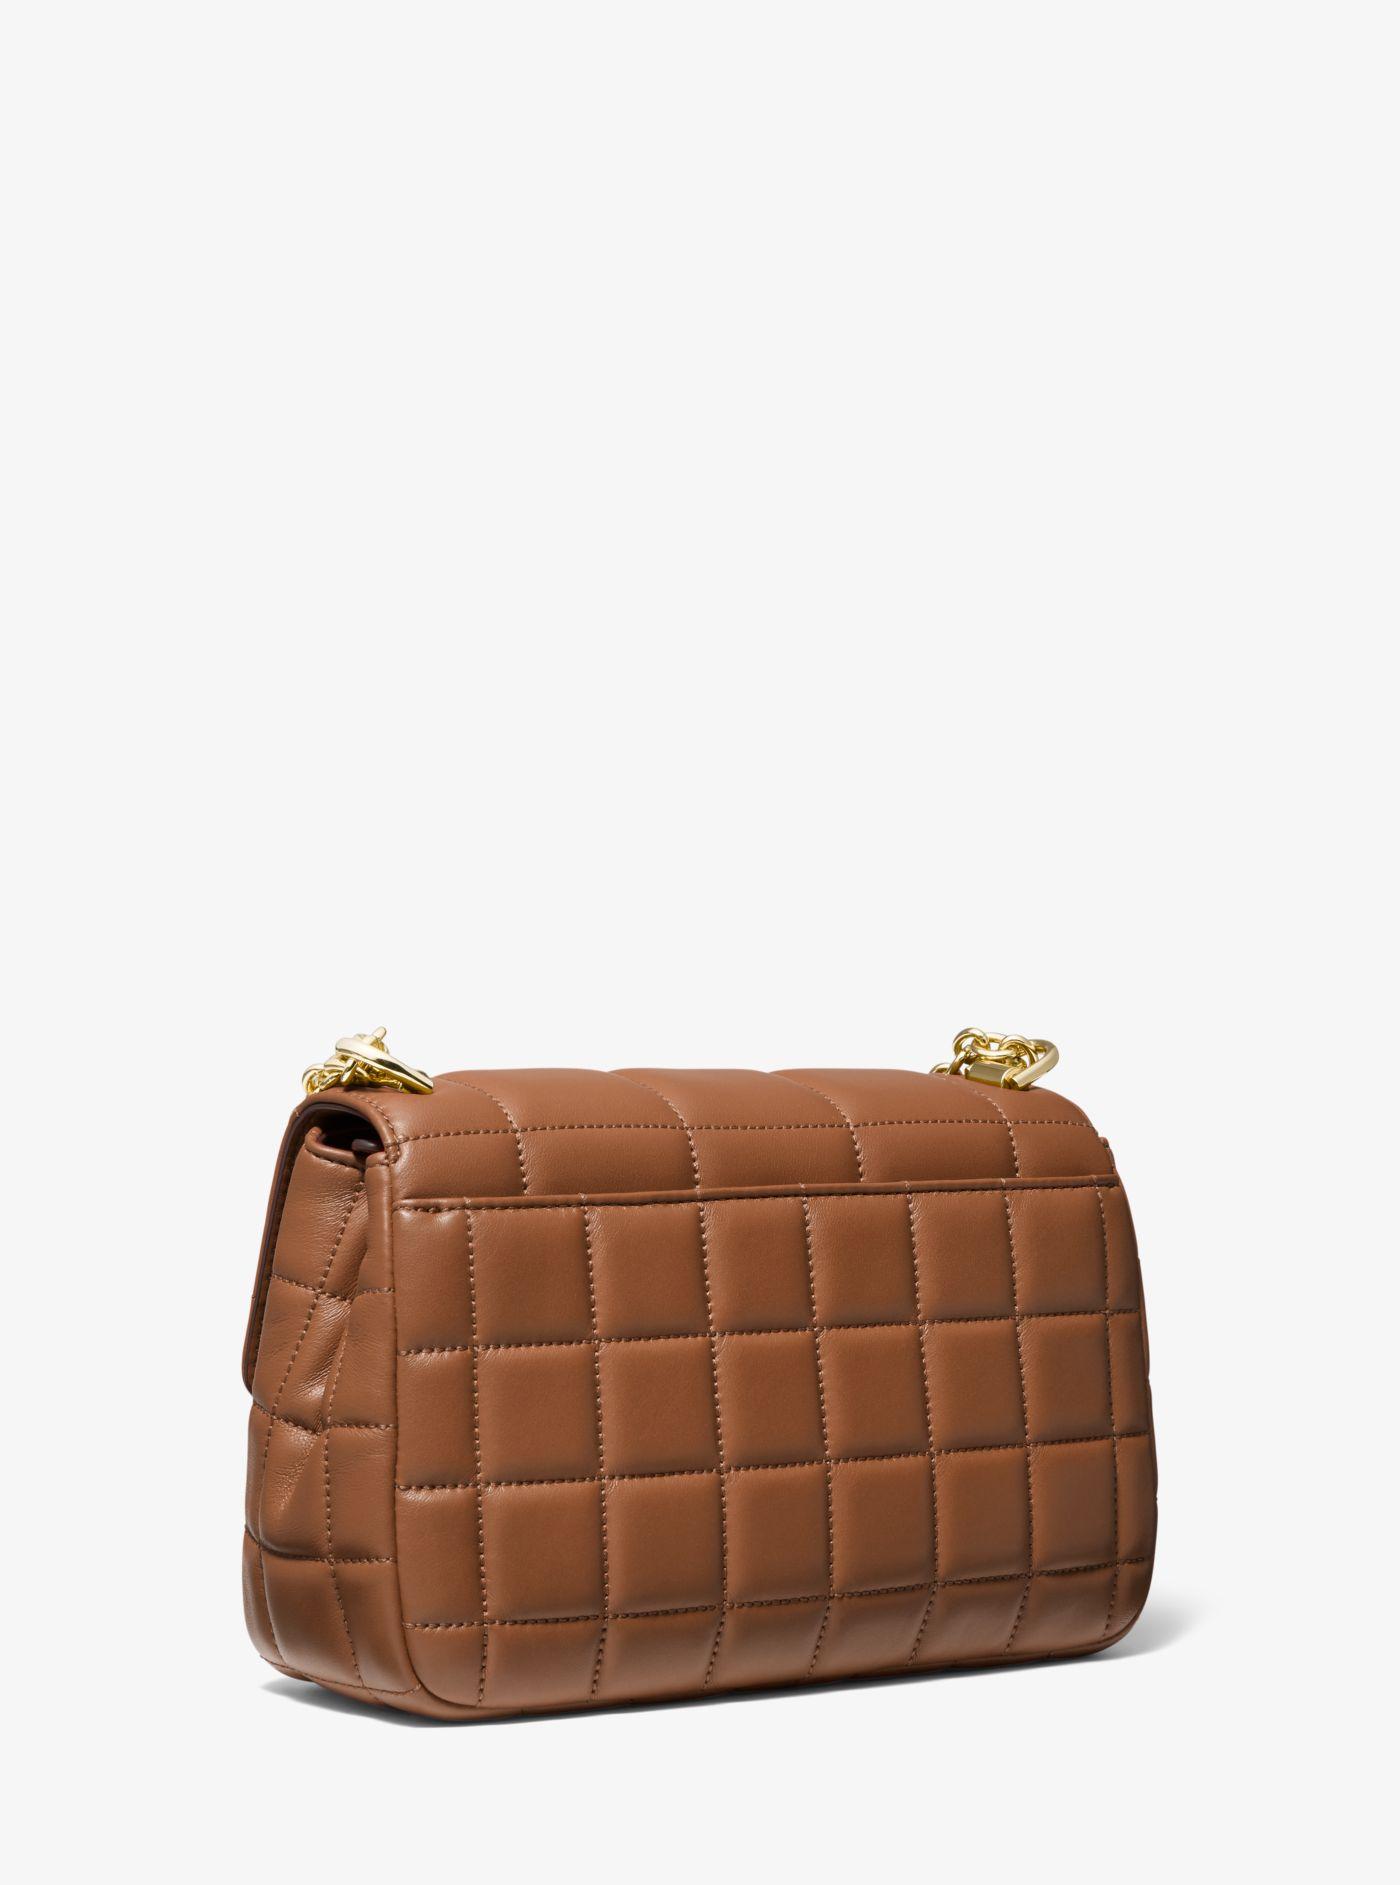 Michael Kors Soho Large Quilted Leather Shoulder Bag in Brown - Lyst